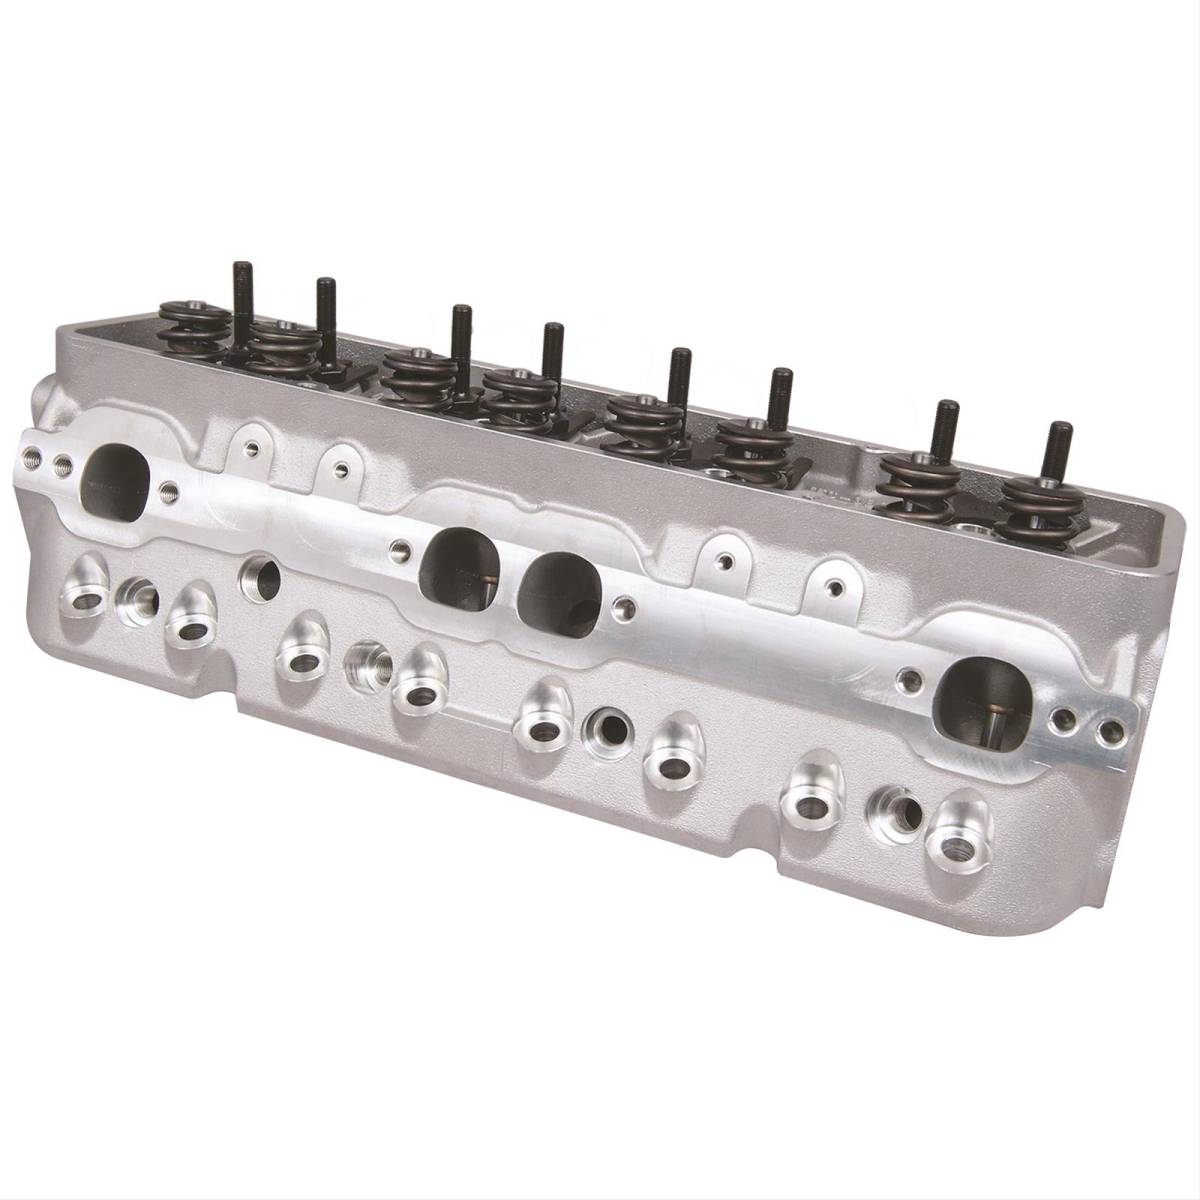 Trickflow - Trickflow Super 23 Cylinder Heads, SB Chevy, 195cc Intake, 62cc Chambers, 1.460" Dual Springs, Perimeter Bolt - Image 1